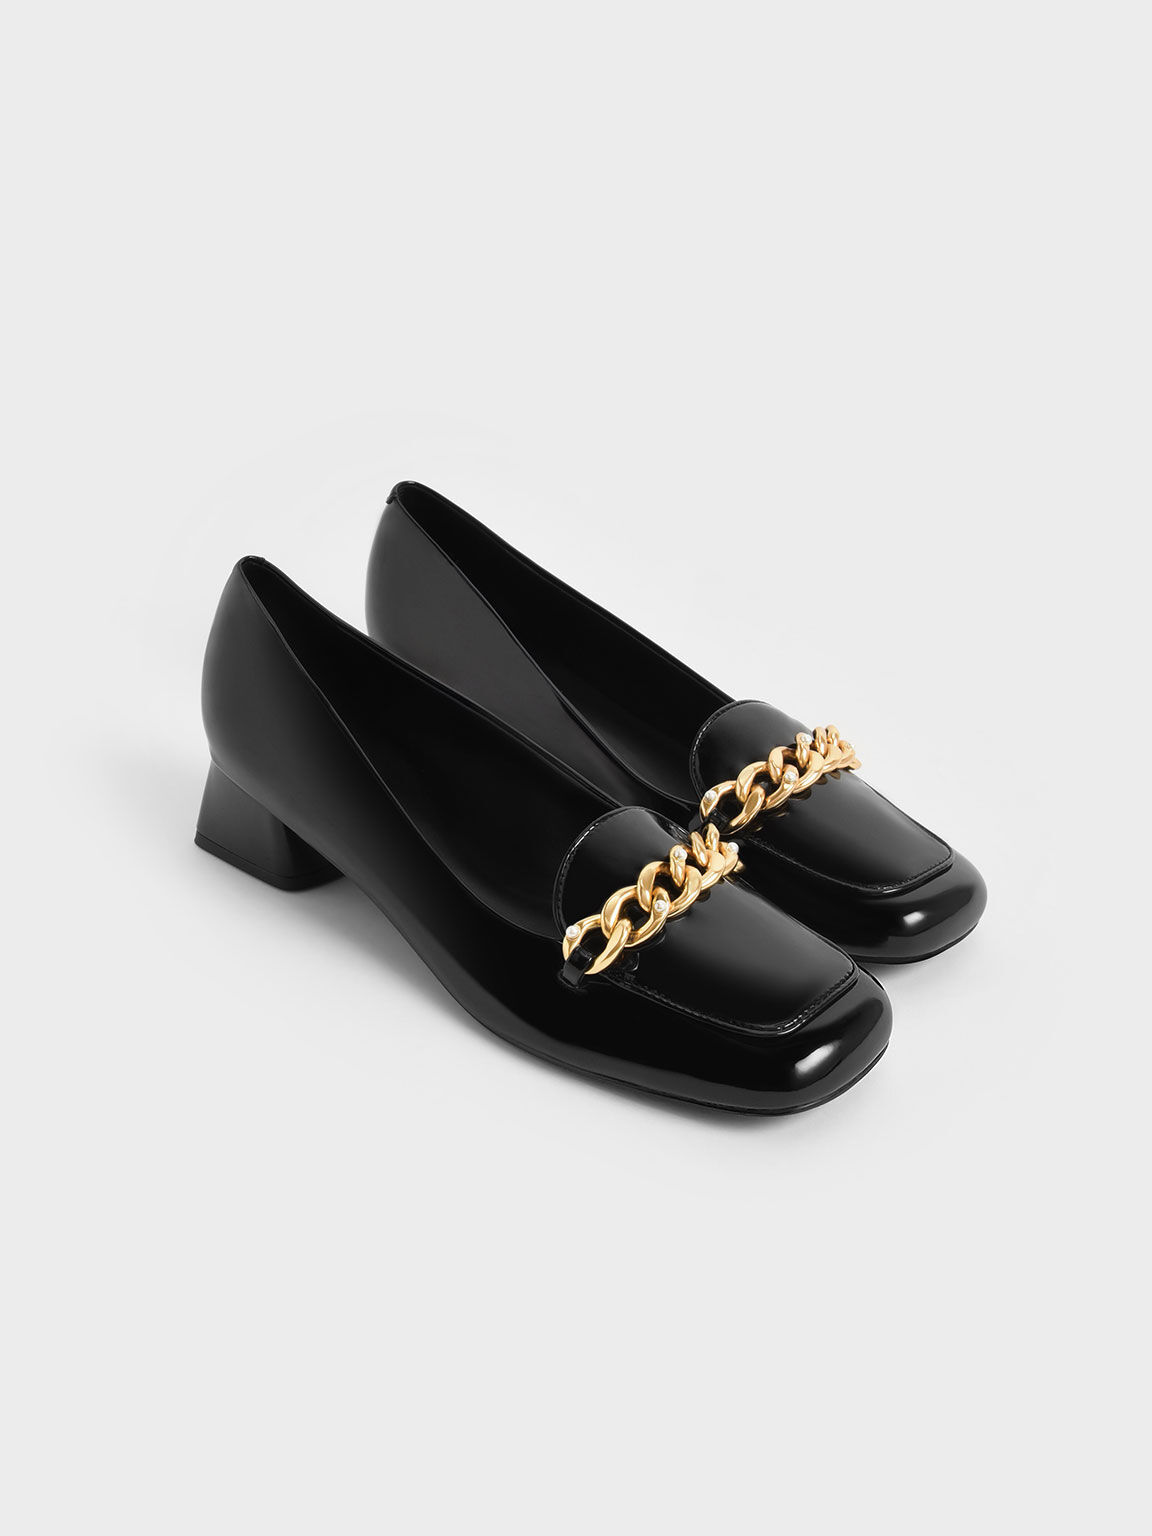 Chain-Link Patent Loafers, Black, hi-res